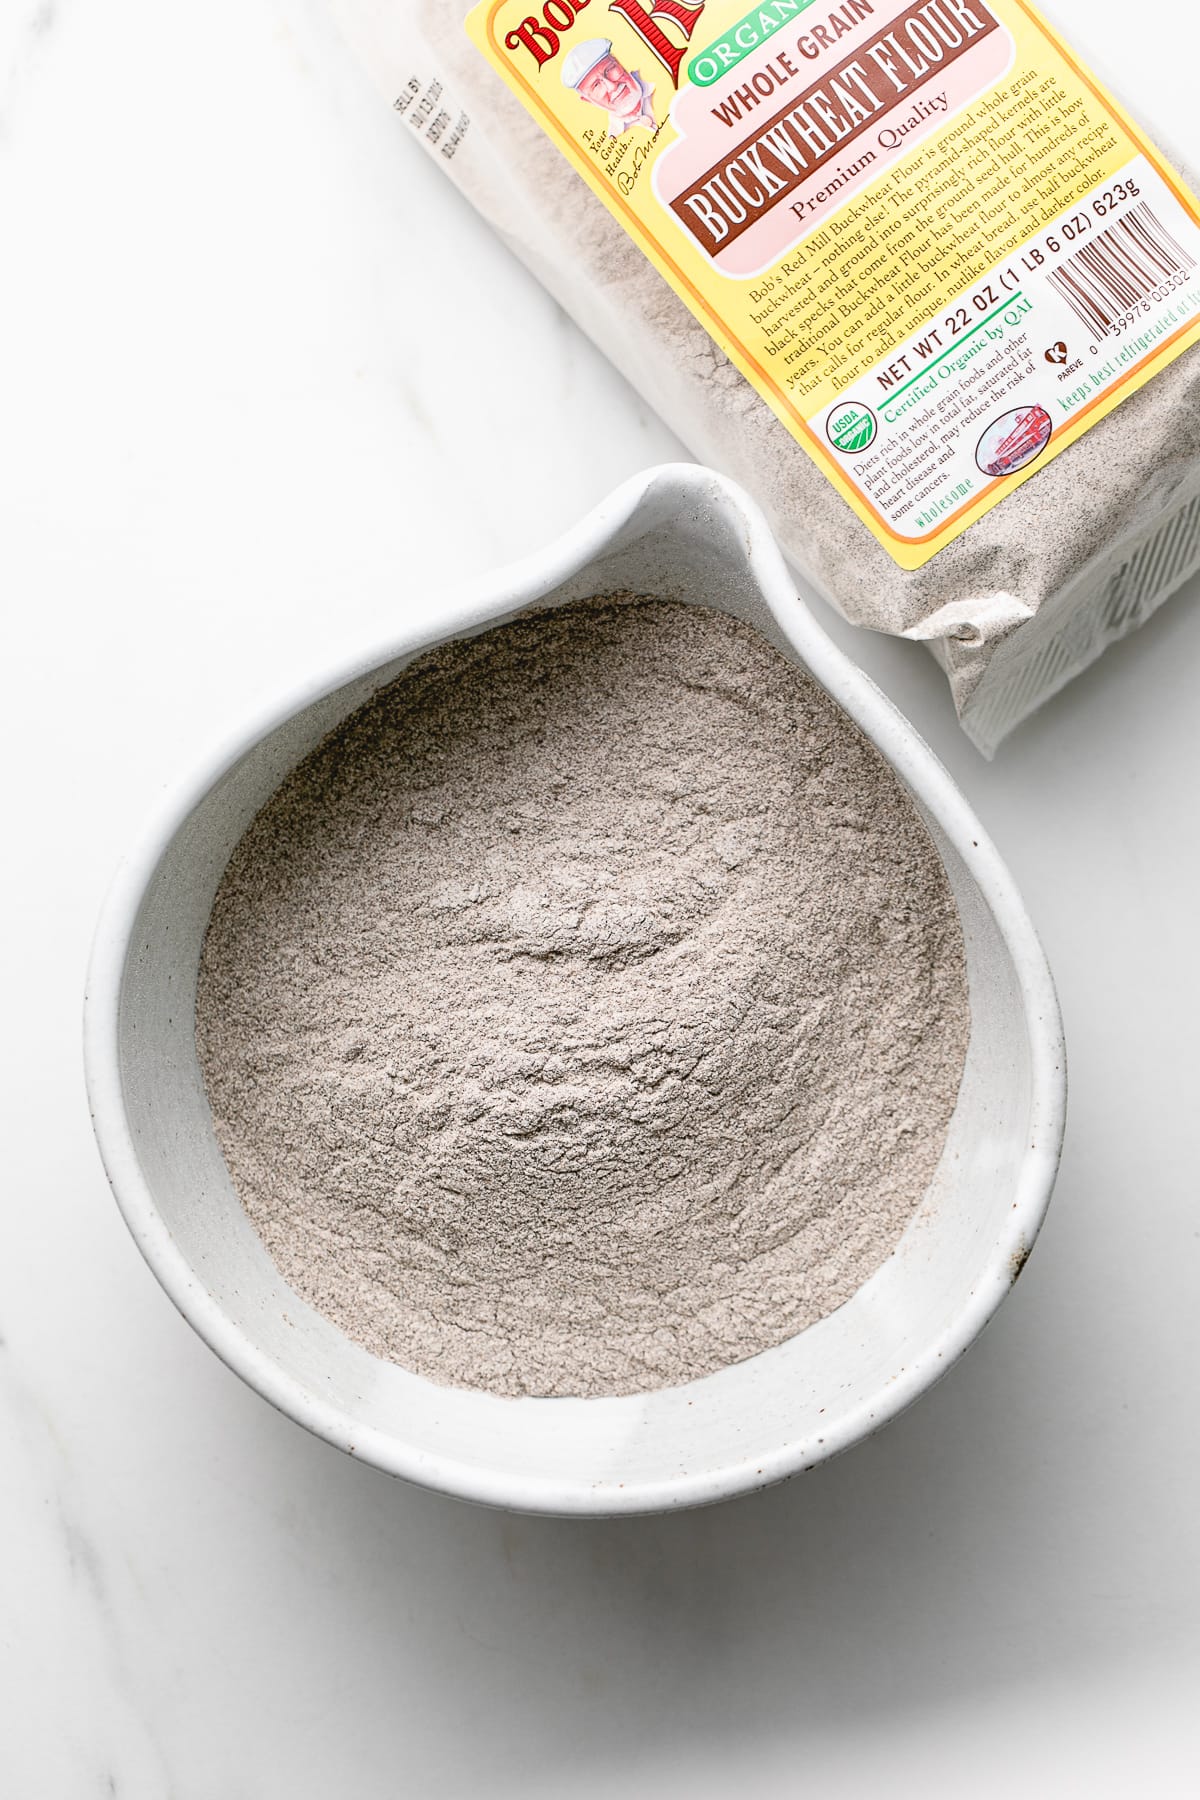 top down view of gluten free buckwheat flour in a bowl with items surrounding.